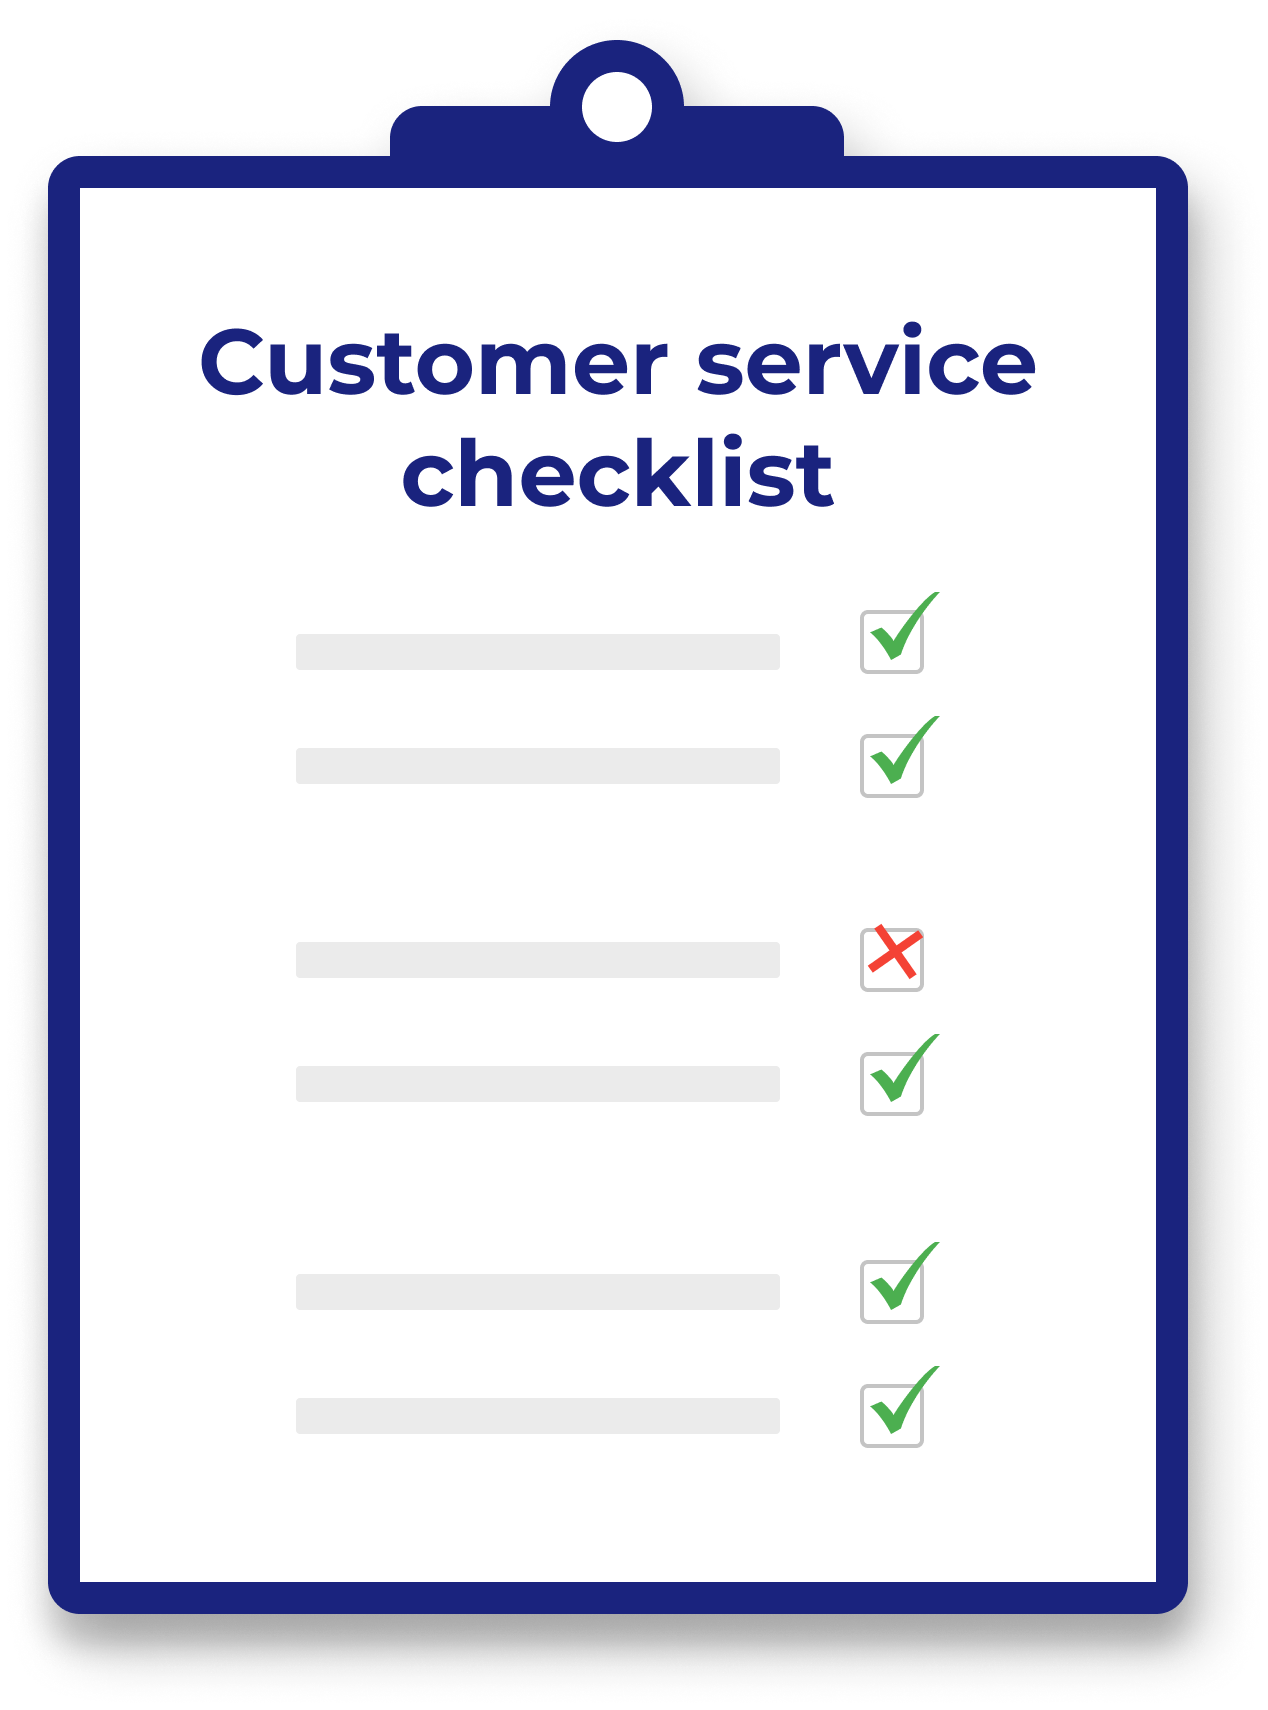 customer service checklist - How to Account for Overpouring and Stop Leaks in Your Venue